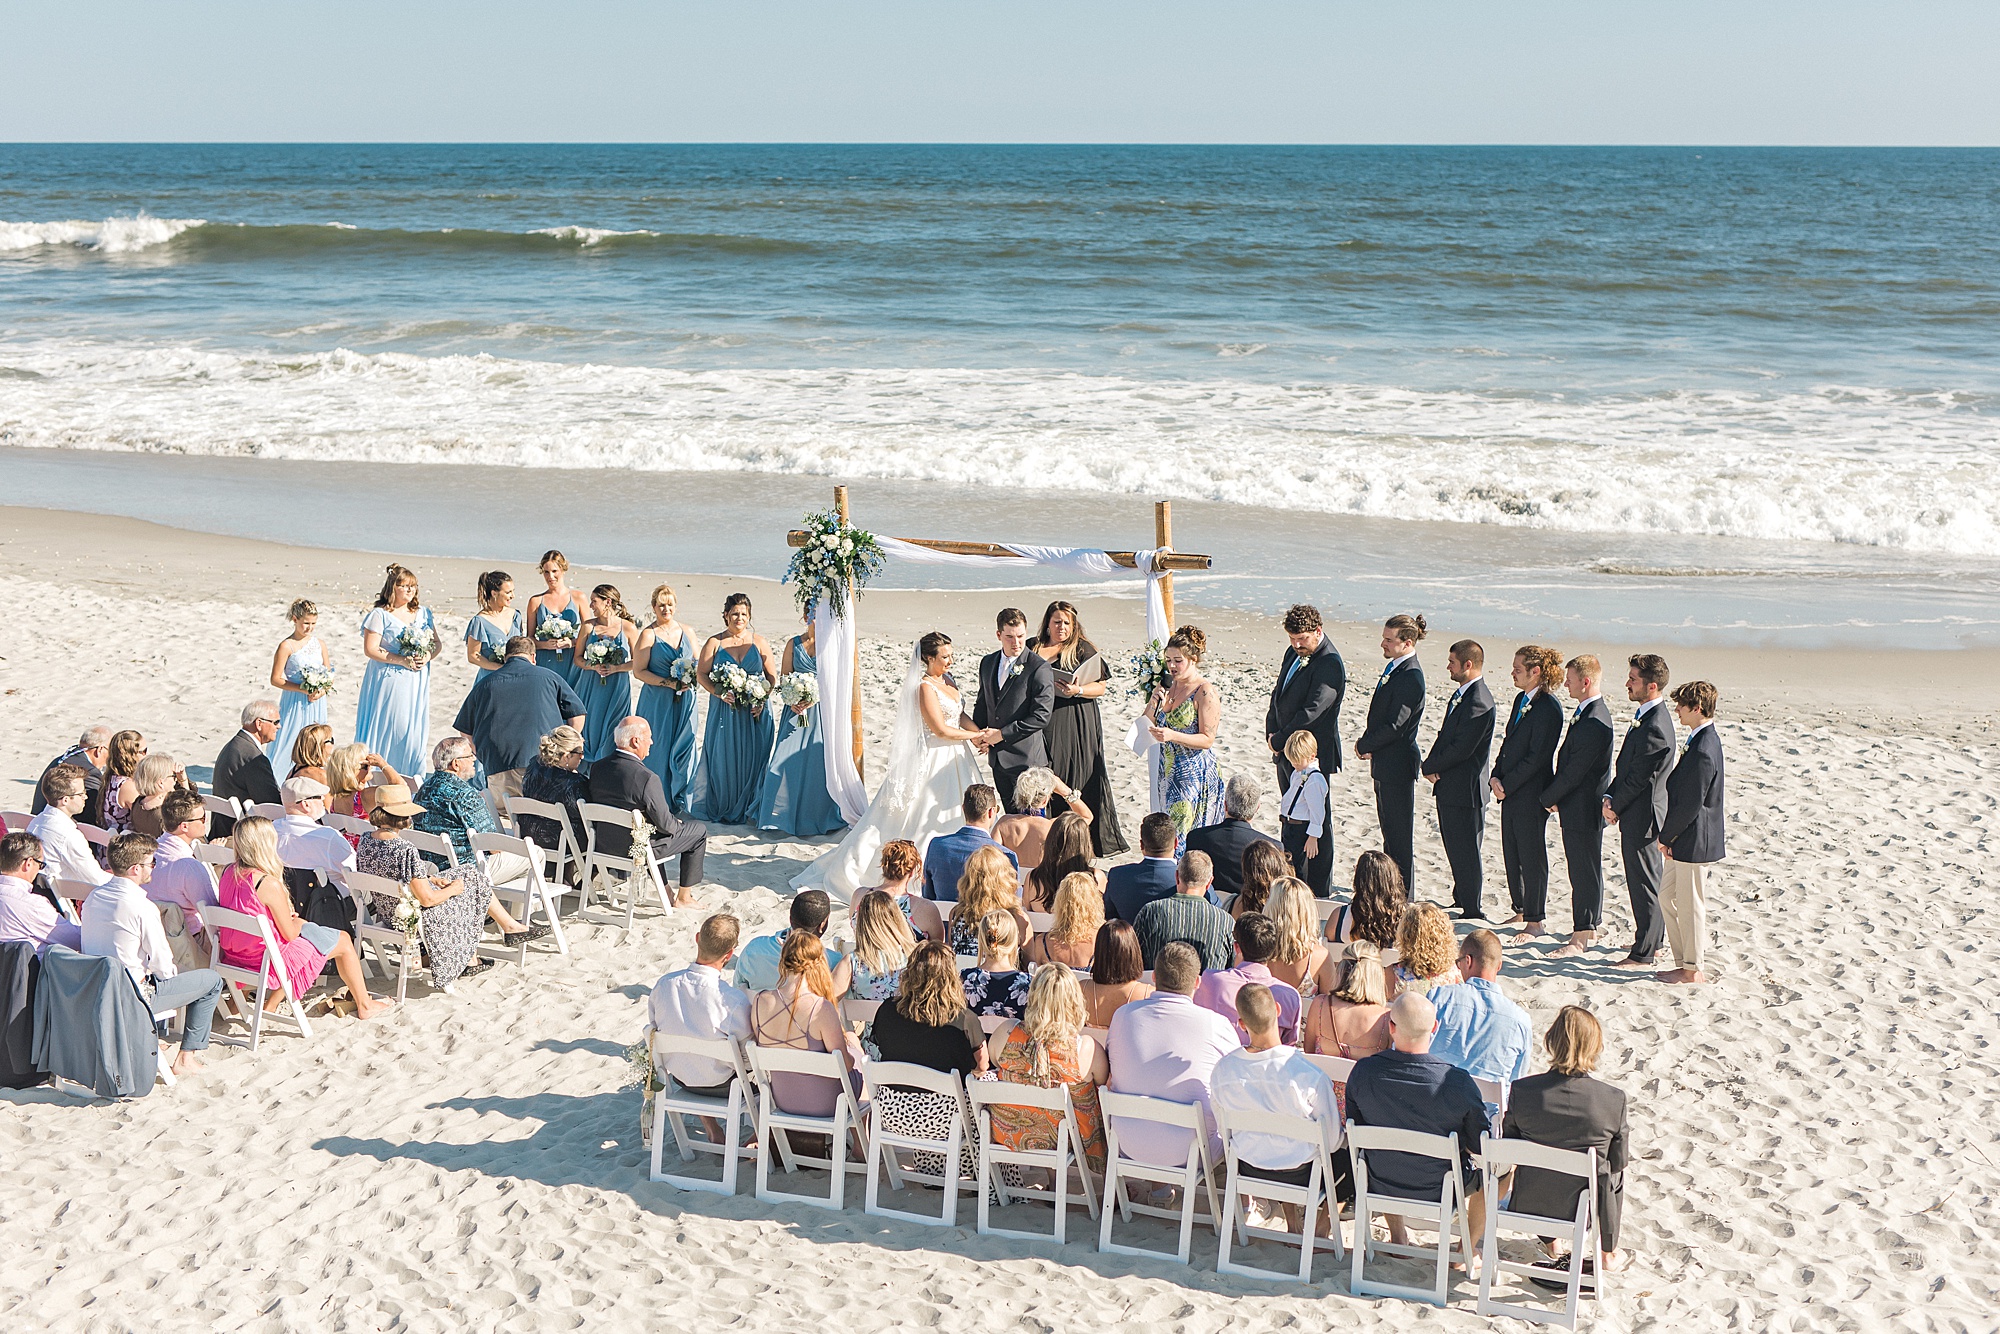 guests gather on the beach to watch seaside wedding